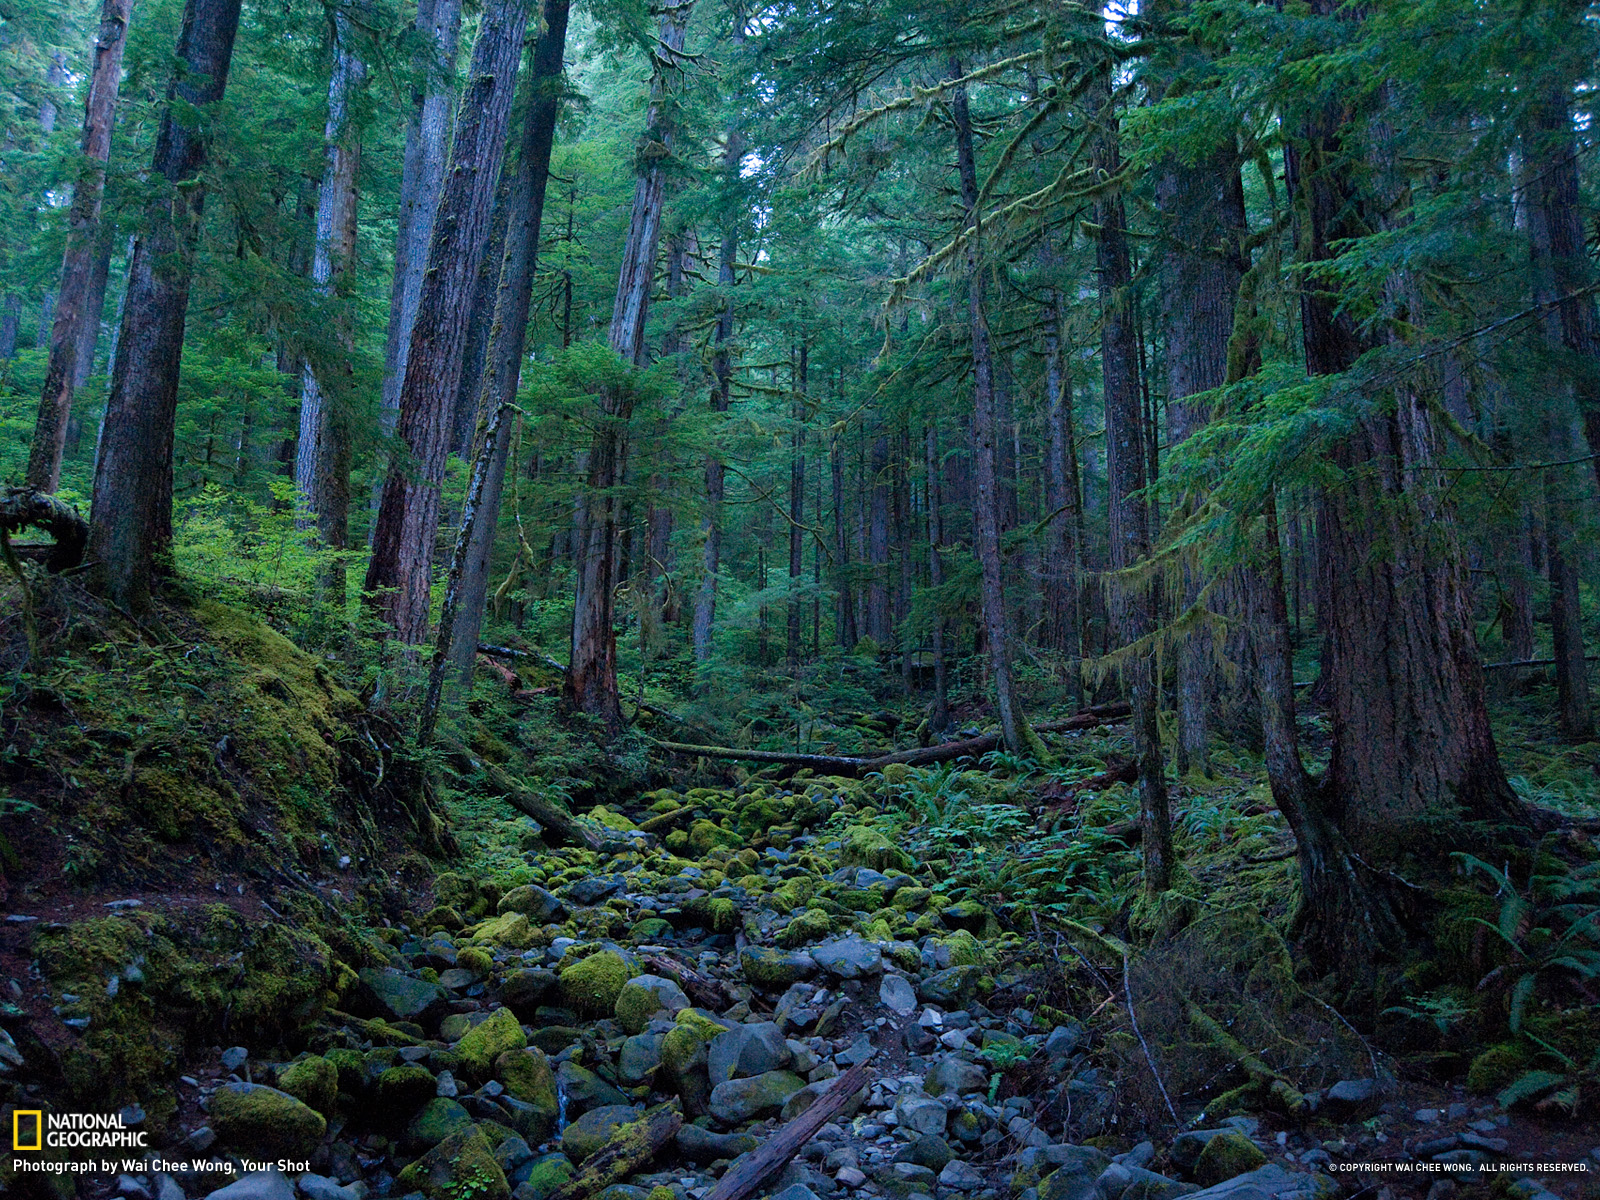 Olympic National Park Wallpaper Geographic Photo Of The Day